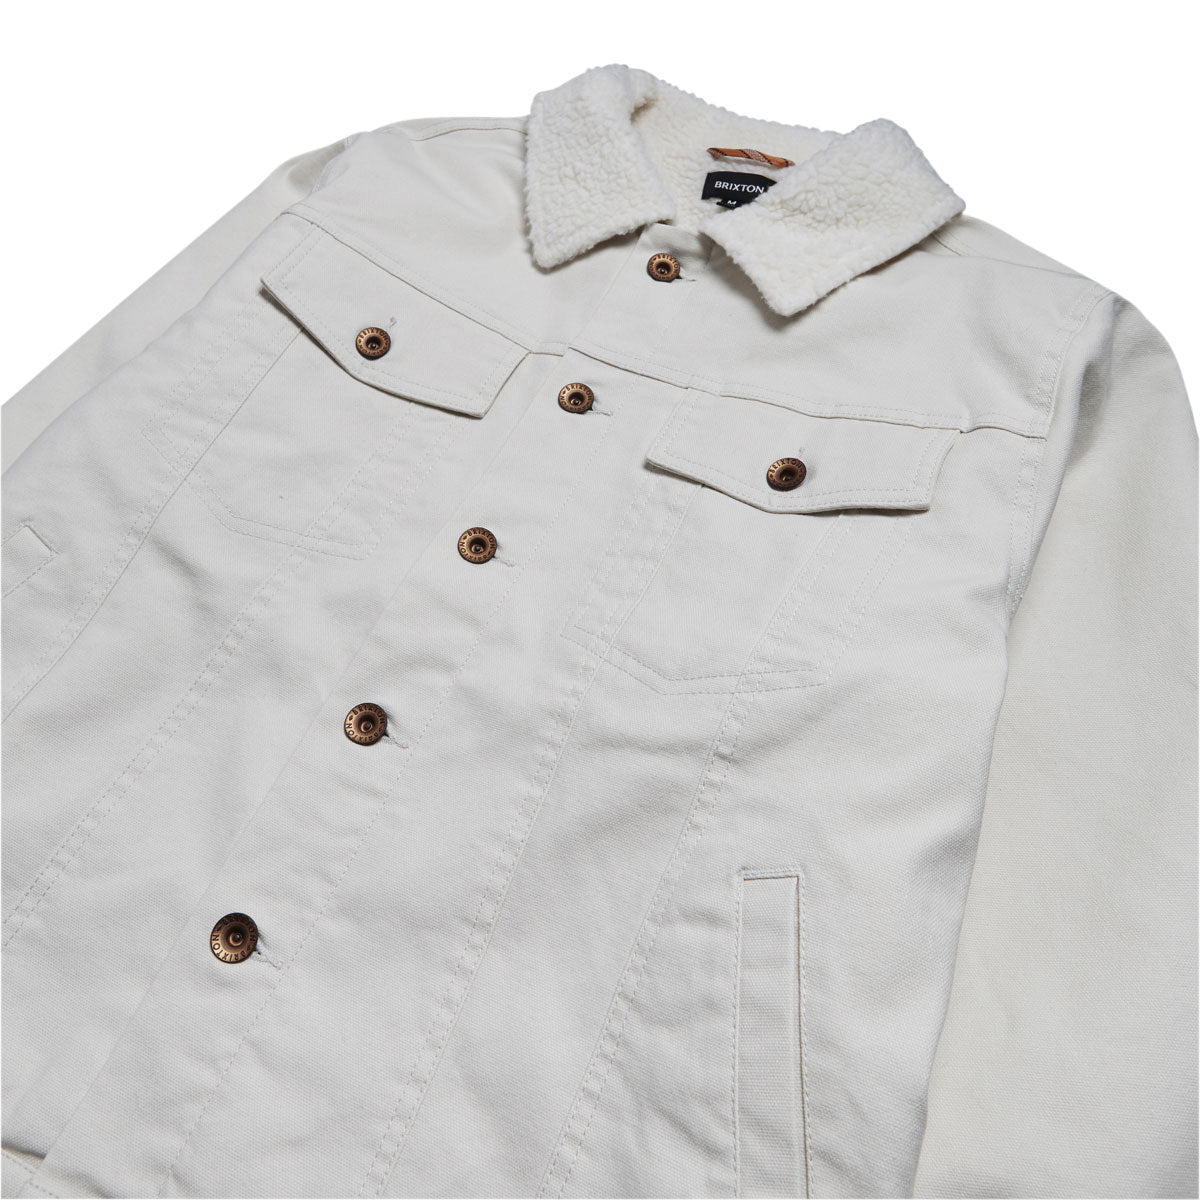 Brixton Builders Cable Lined Trucker Jacket - Natural image 4